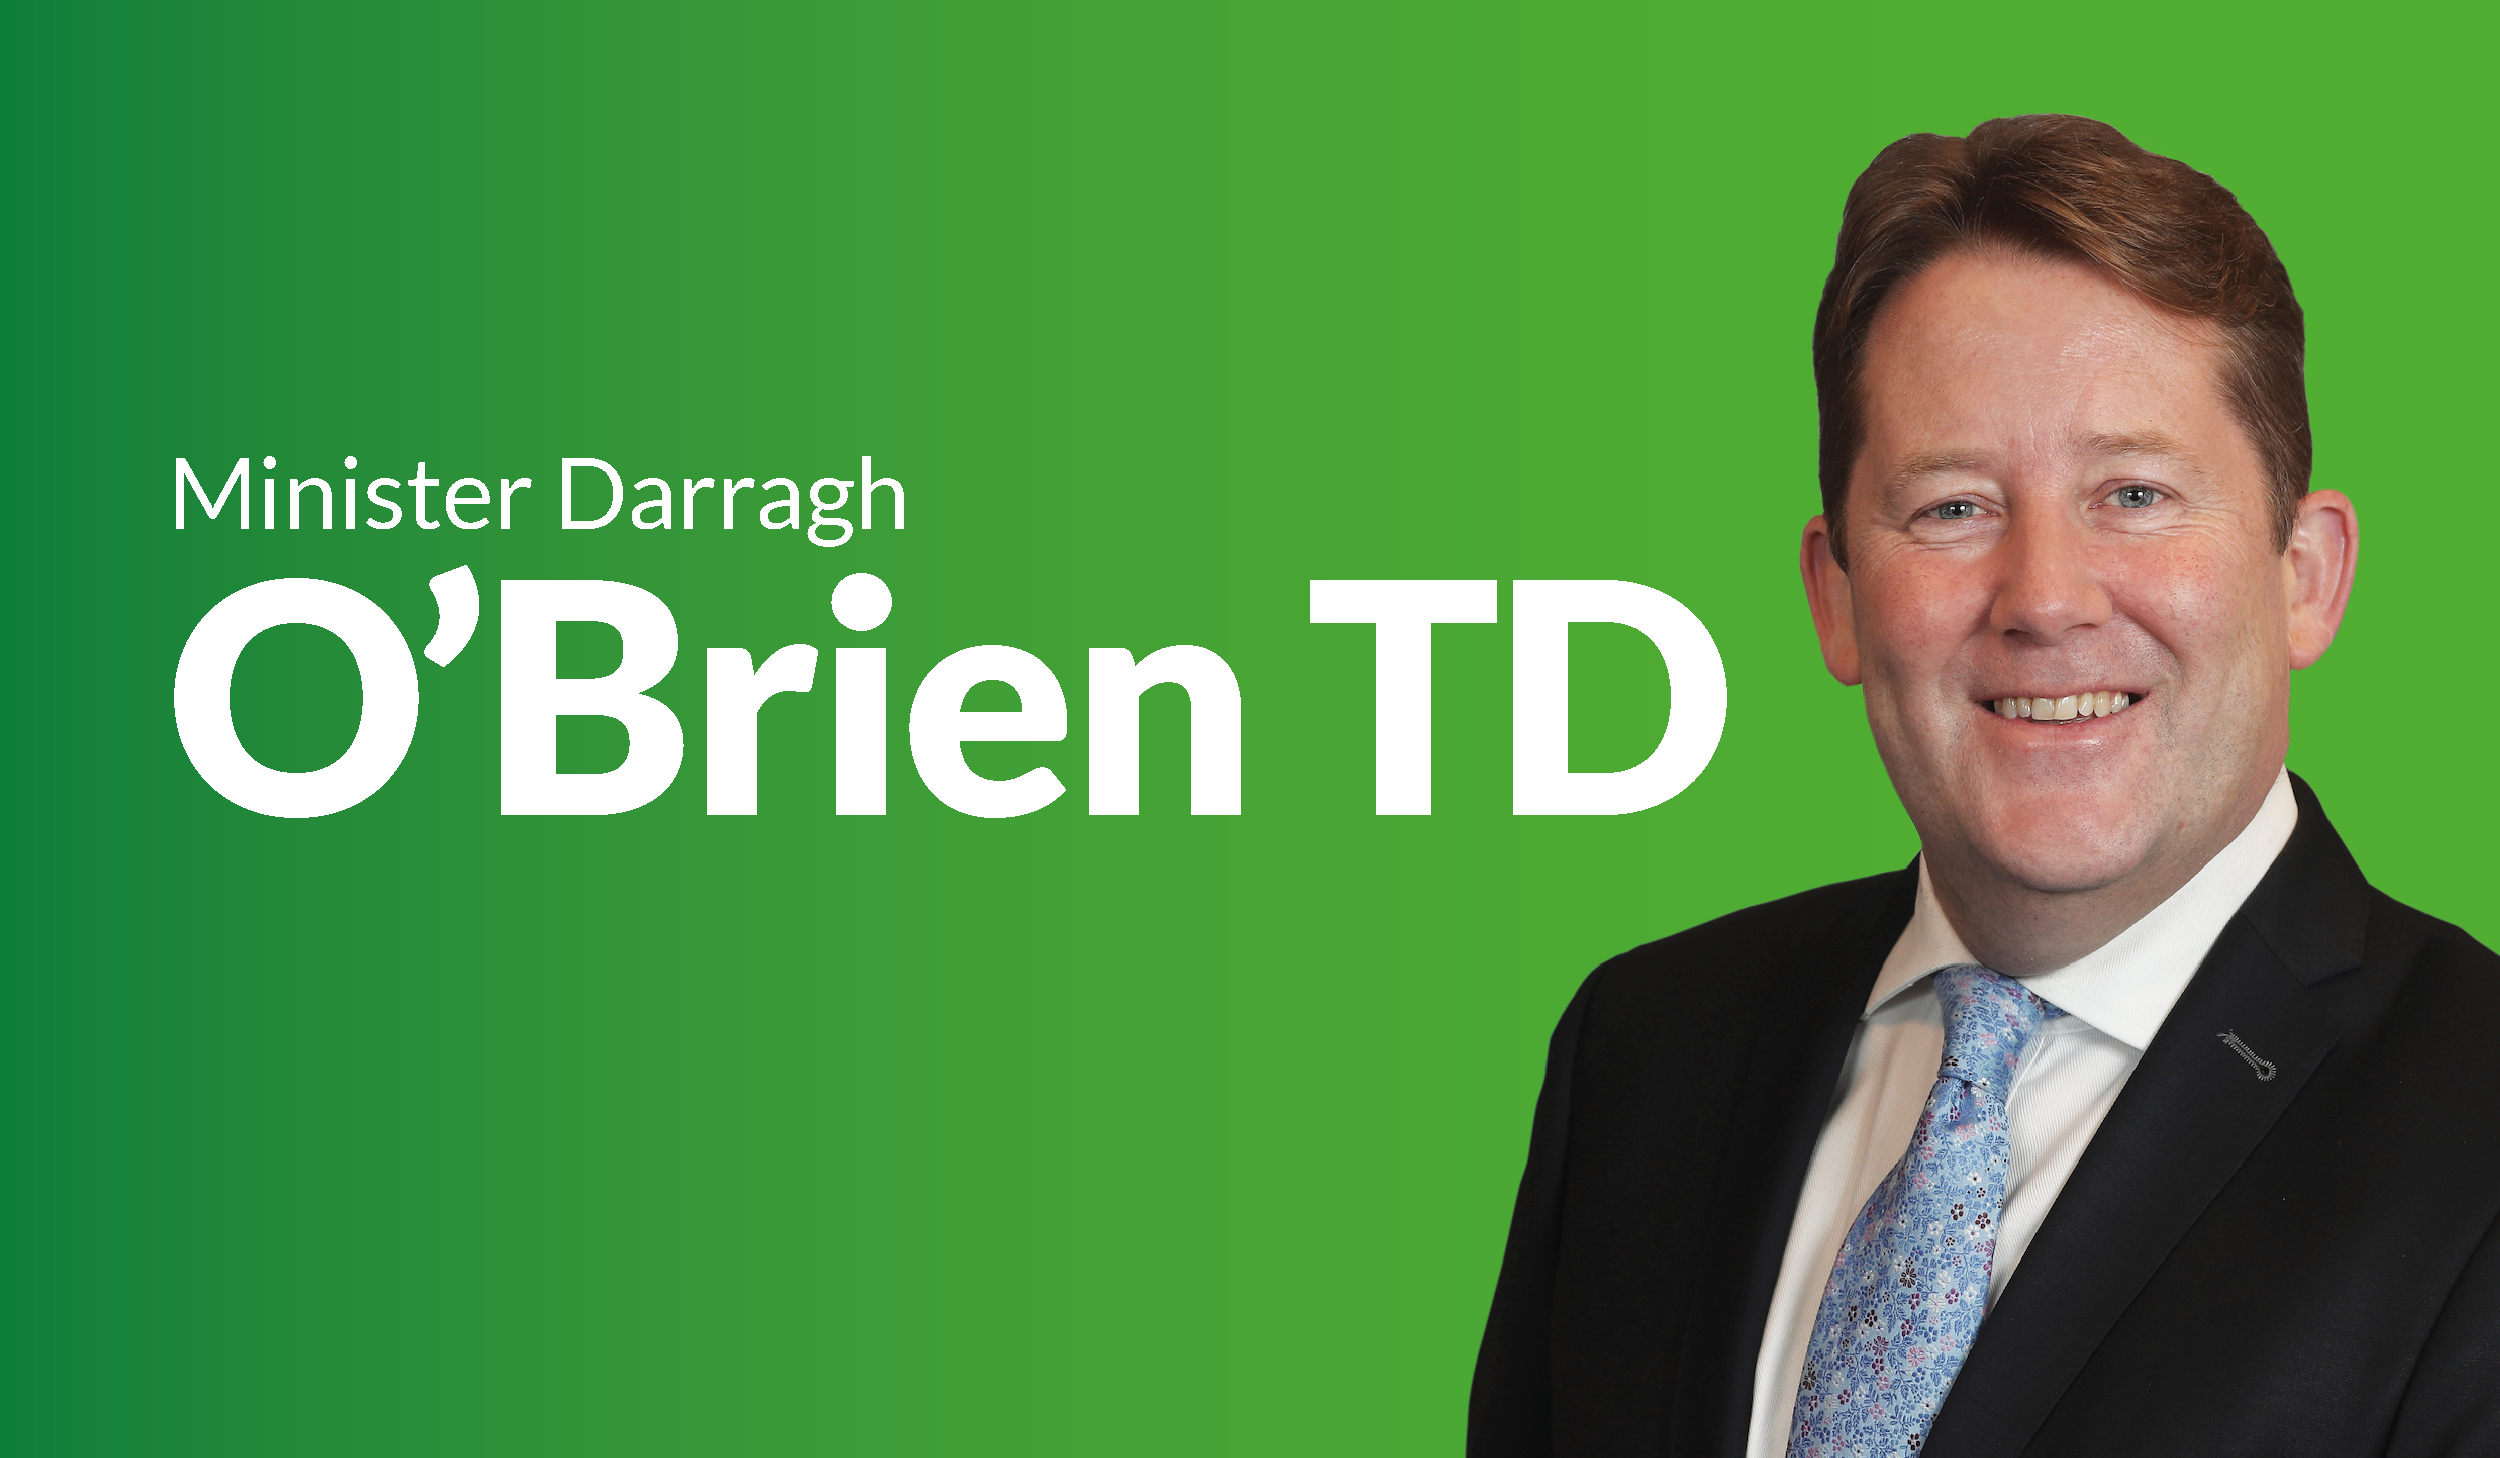 Speech by Darragh O’Brien TD, Minister for Housing, Local Government and Heritage at the Fianna Fáil European Election Manifesto Launch, May 24th 2024